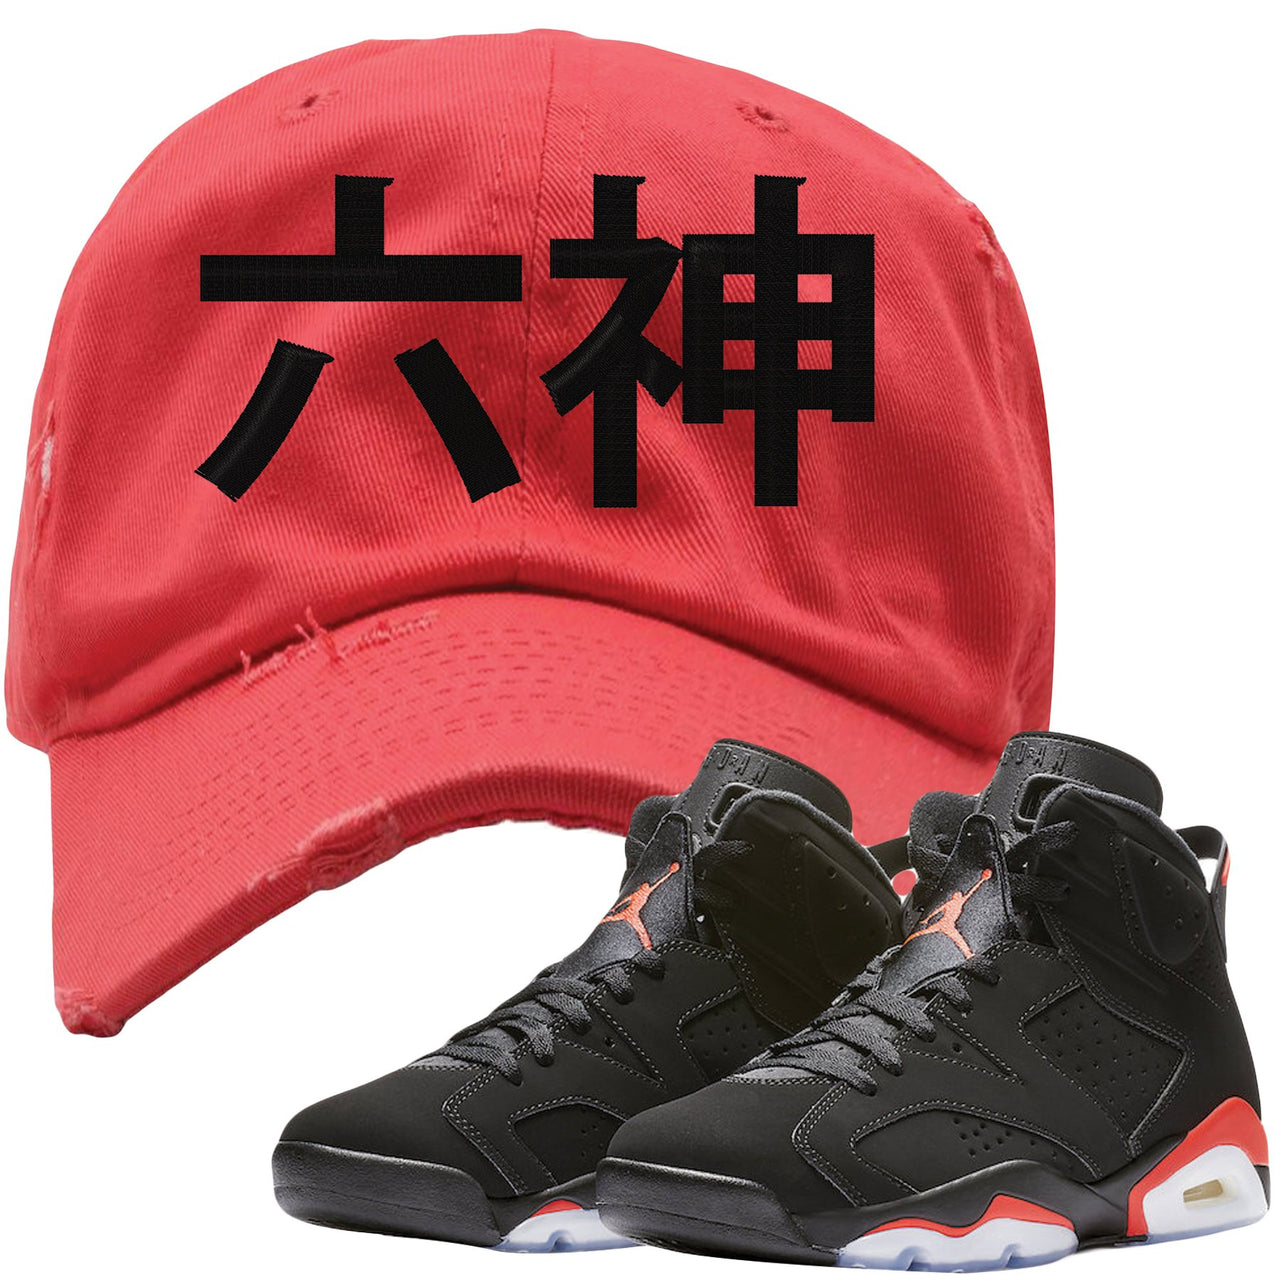 The Jordan 6 Infrared Distressed Dad Hat is custom designed to perfectly match the retro Jordan 6 Infrared sneakers from Nike.